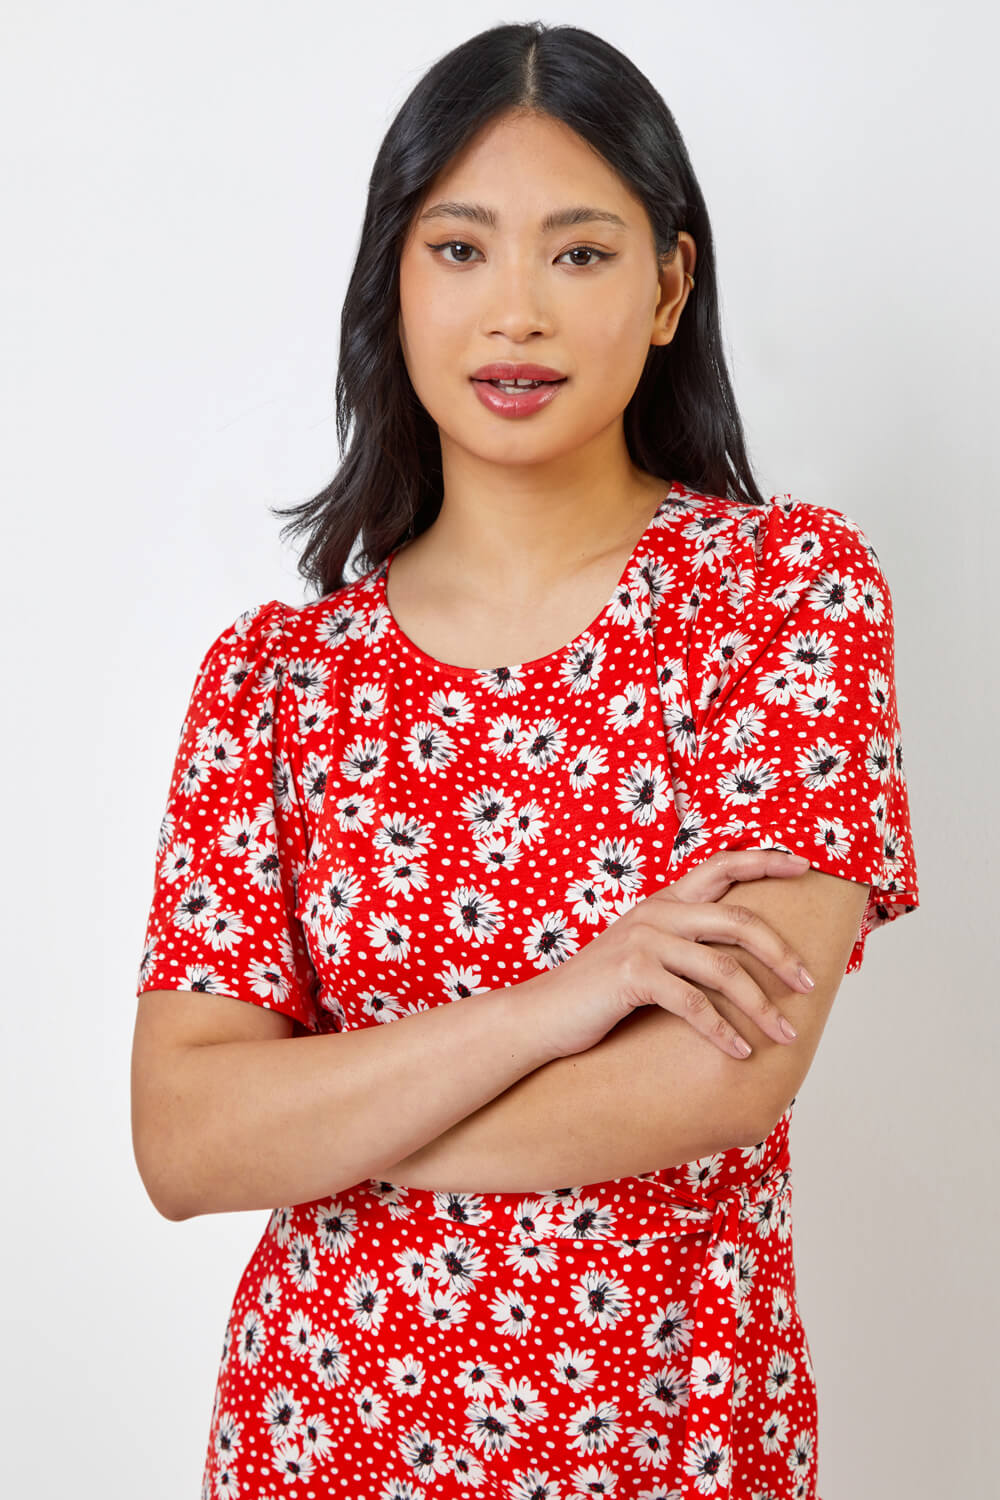 Red Petite Floral Print Jersey Dress, Image 4 of 5